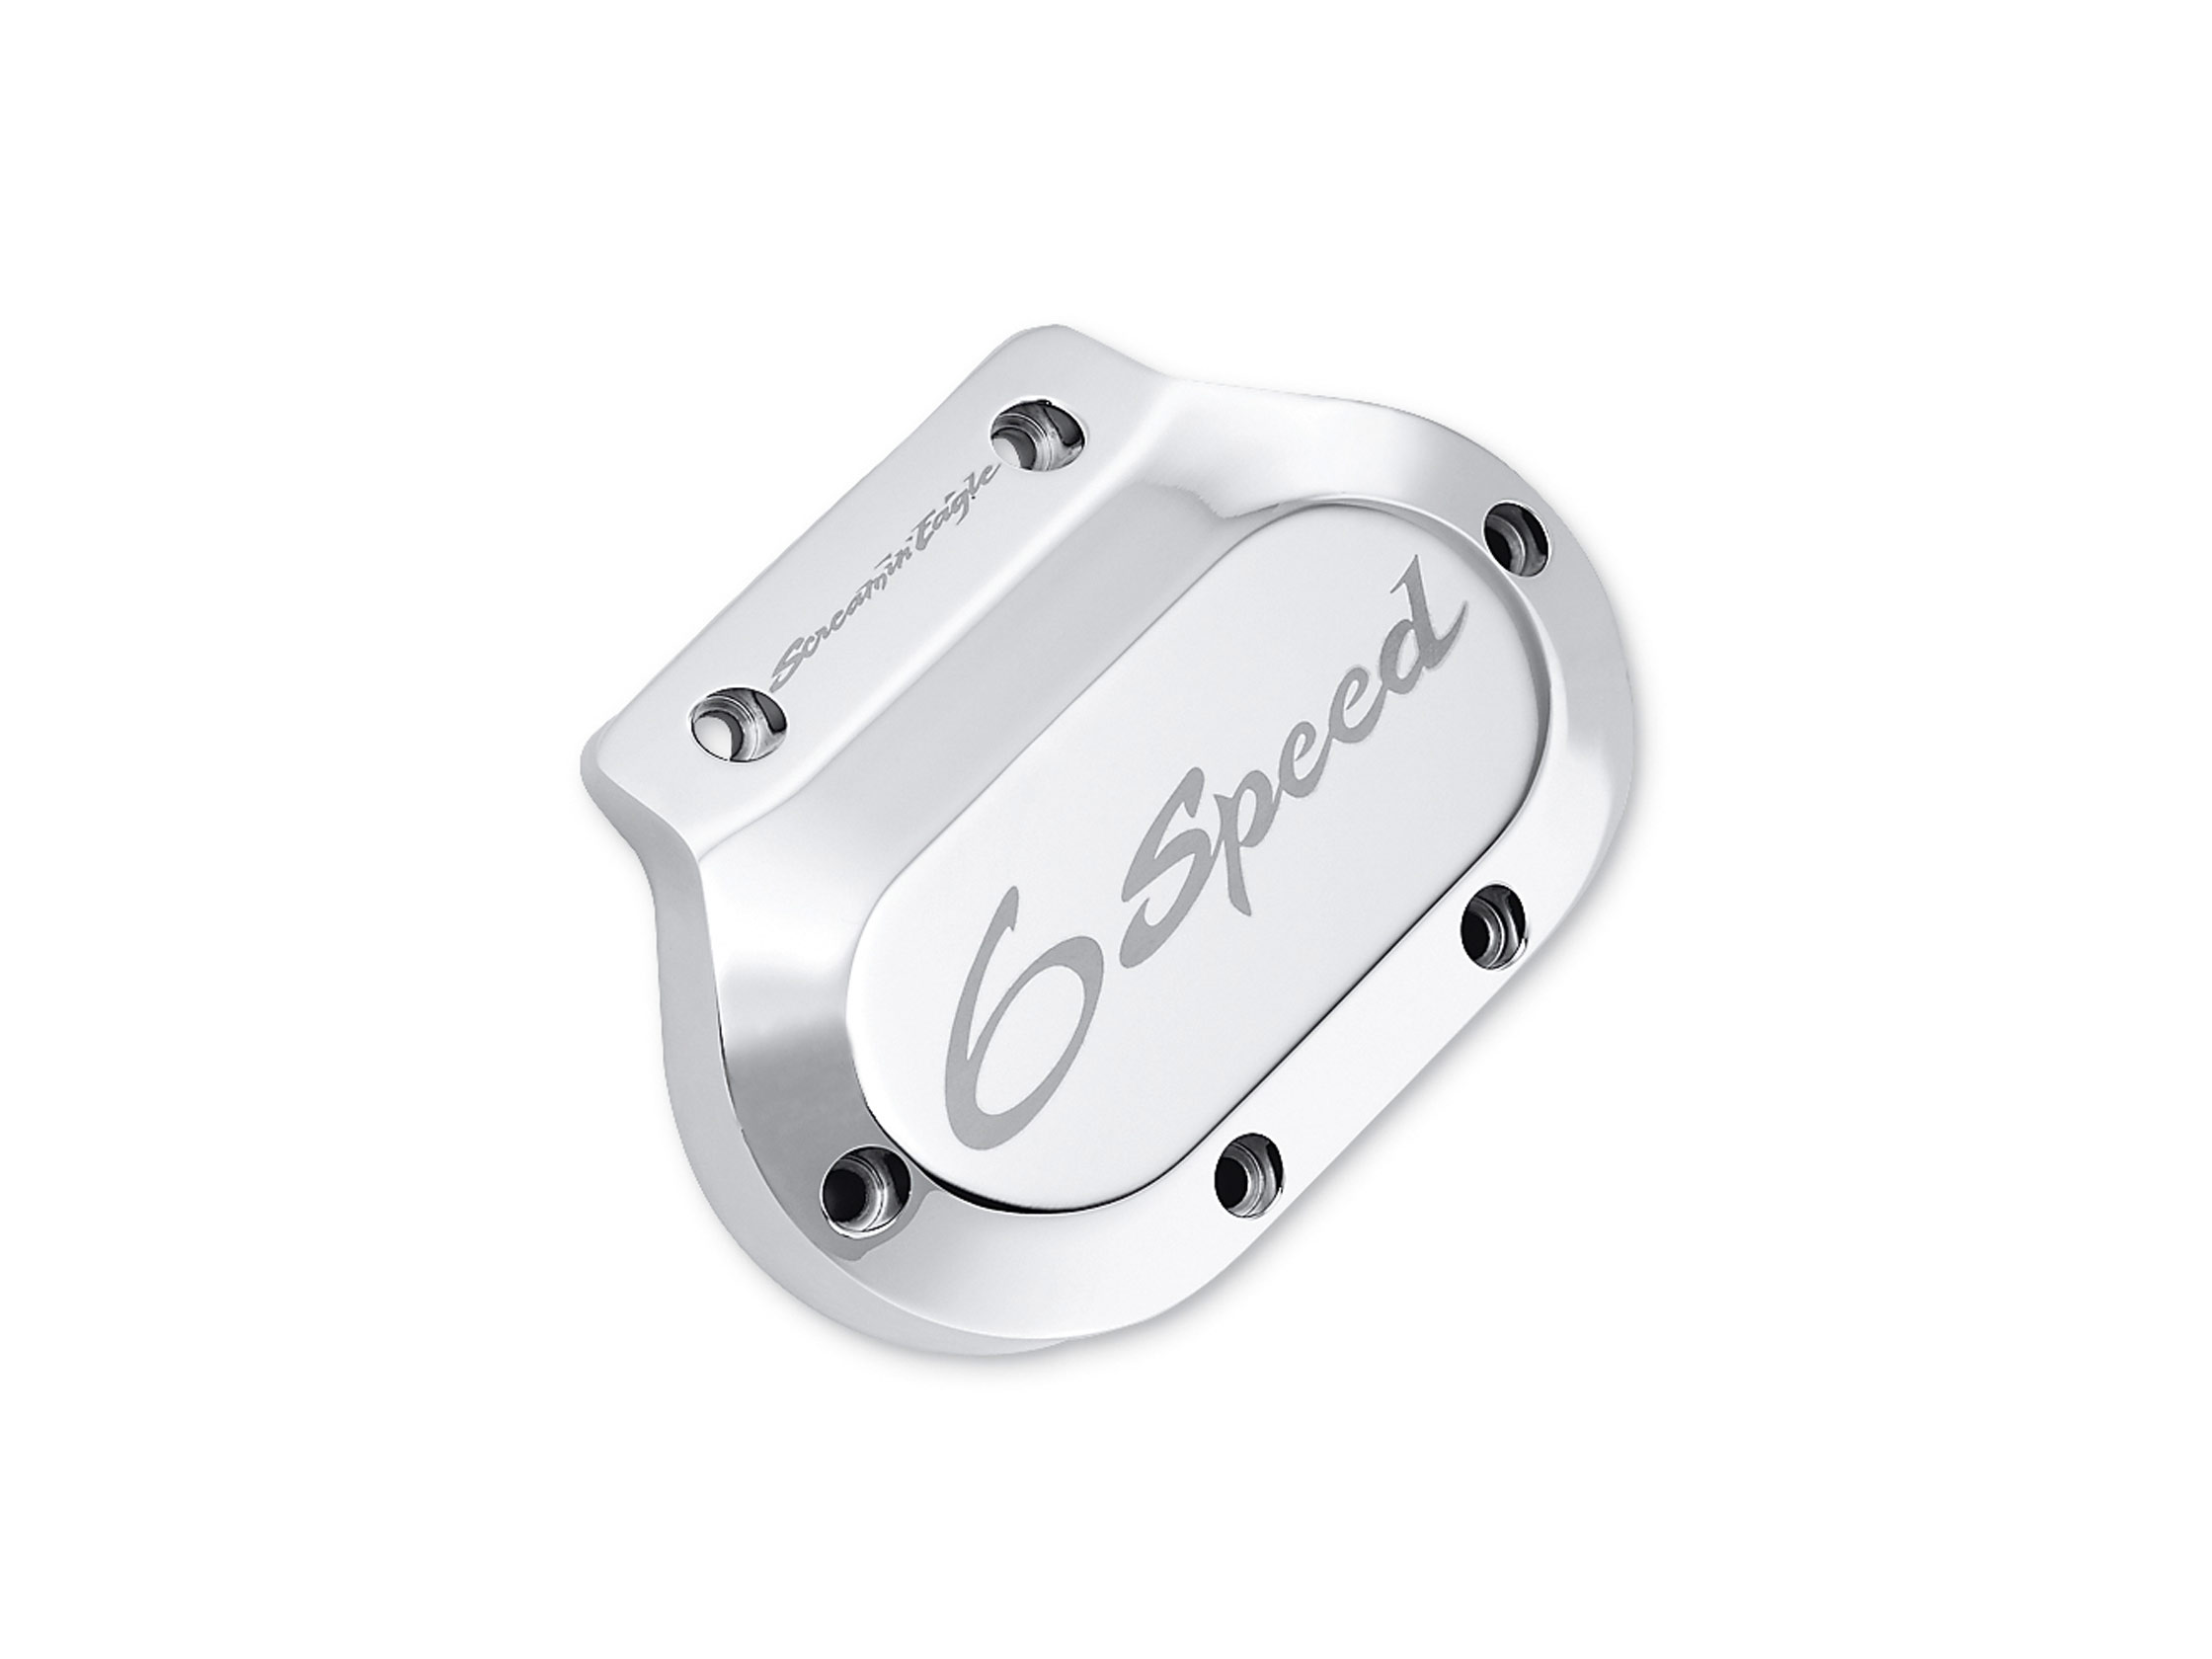 SCREAMIN' EAGLE TRANSMISSION SIDE COVER<br />FOR 6-SPEED TRANSMISSION -  Cable Clutch 38752-04 / Motors / Screamin´ eagle / Parts & Accessories / -  House-of-Flames Harley-Davidson